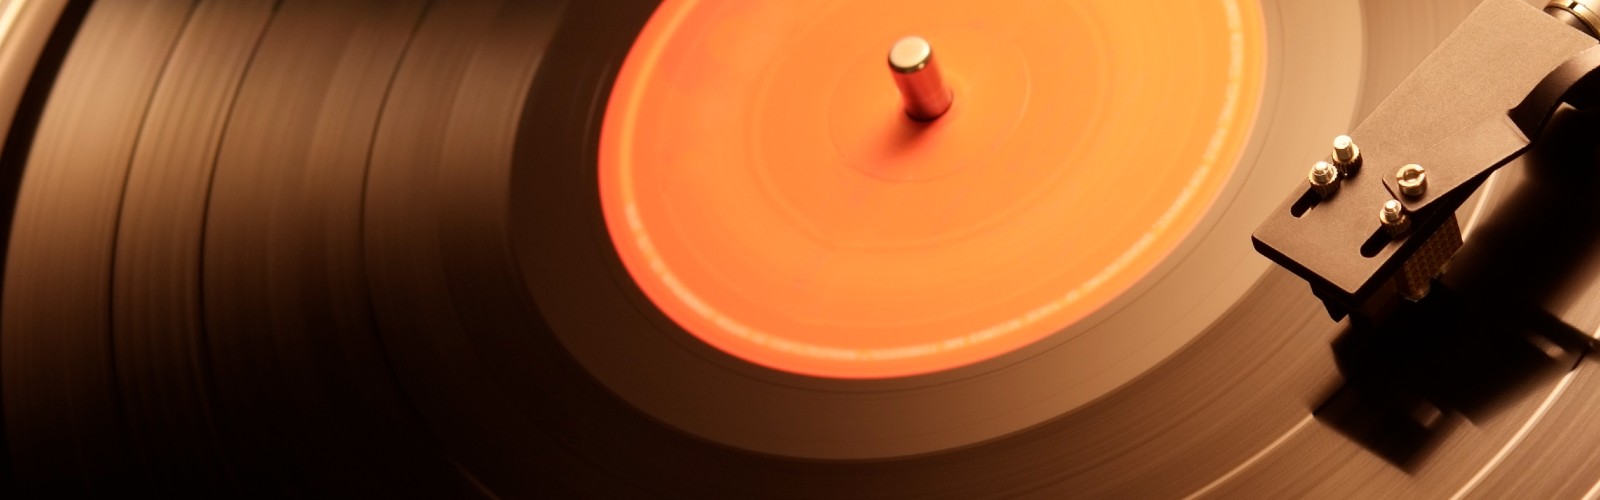 A close up image of a record on a turntable